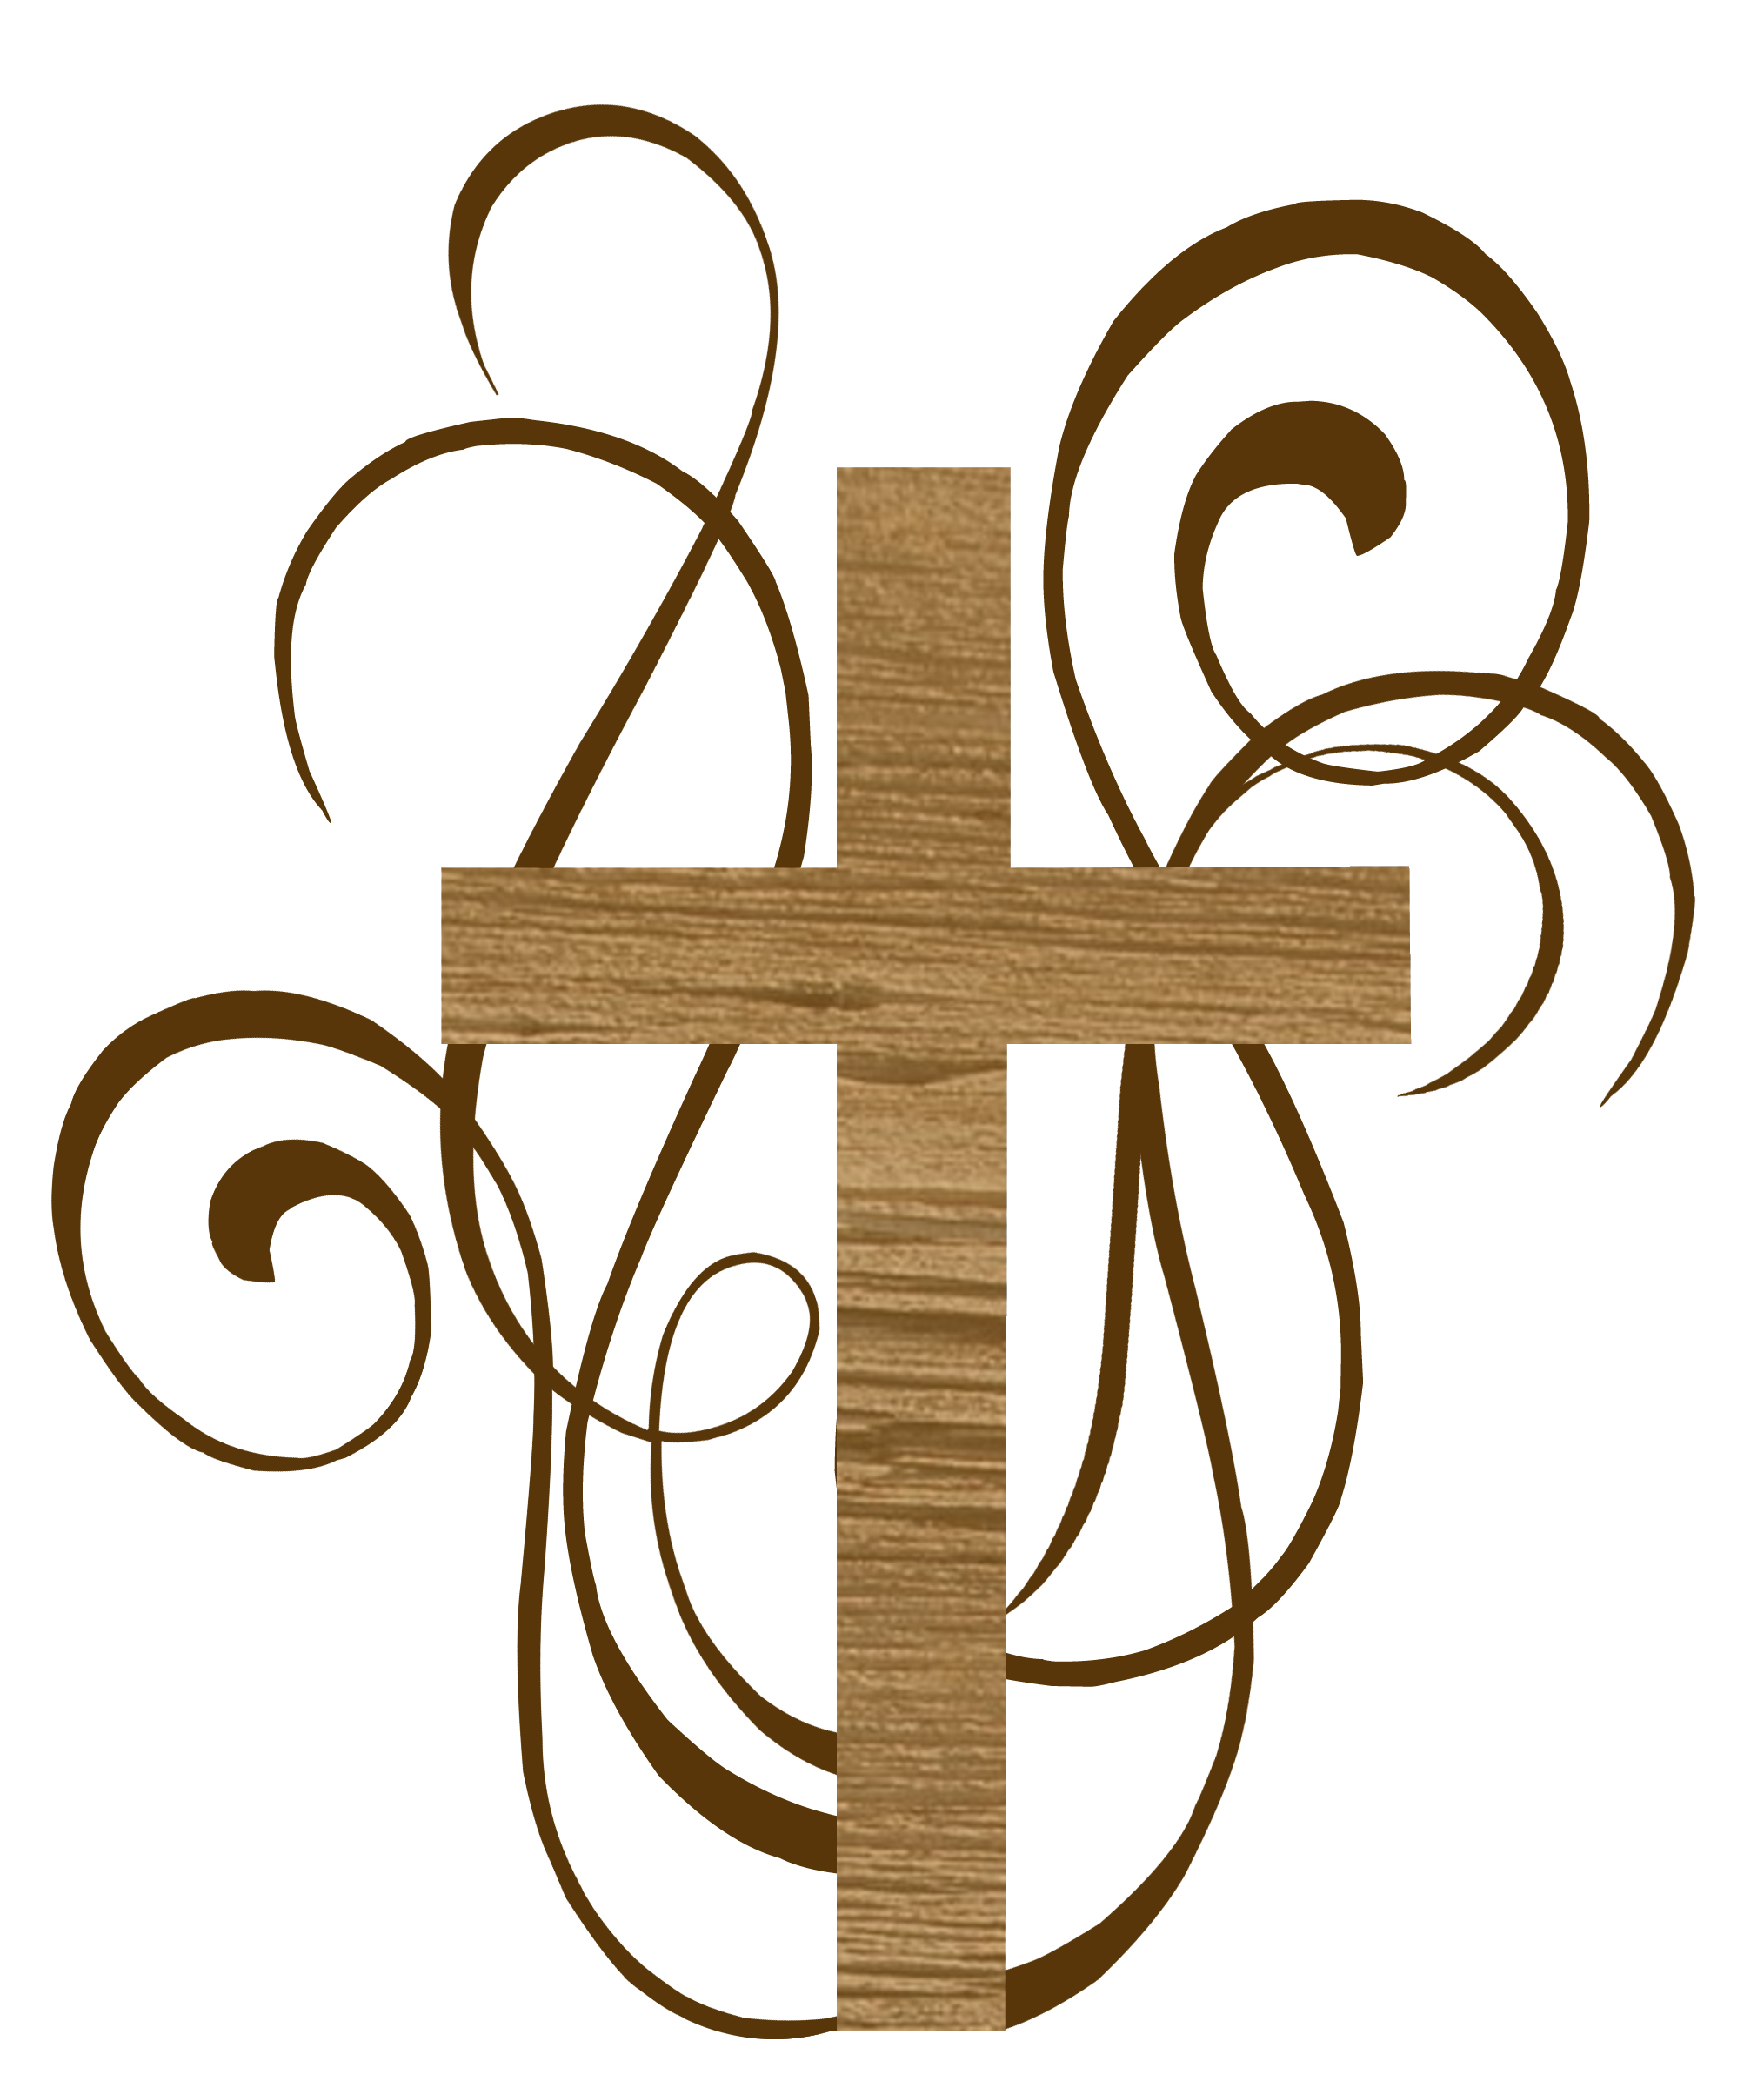 Baptism Clipart to Download - dbclipart.com